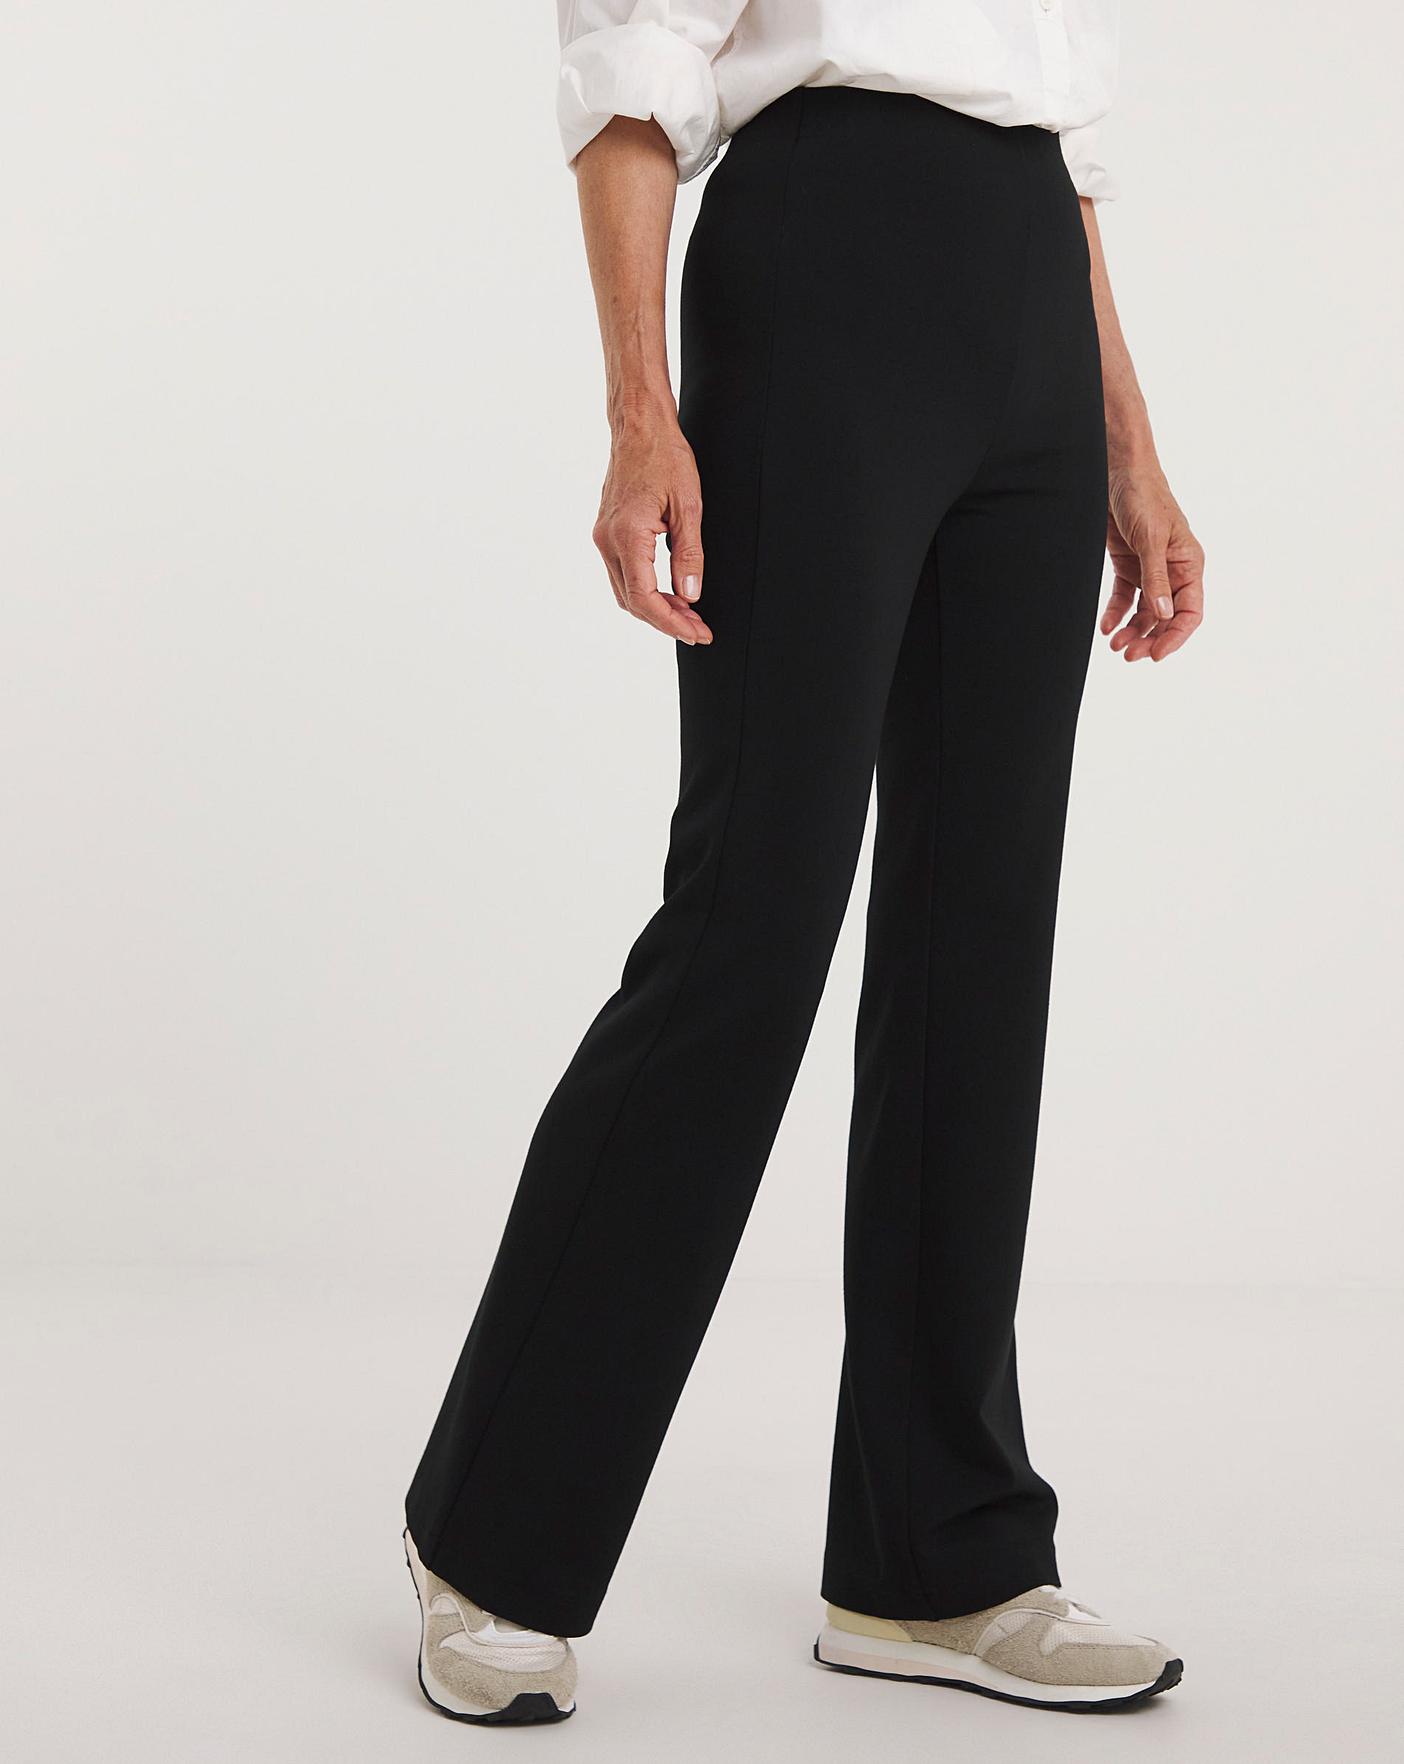 Buy Clarks Black Skinny Fit Girls Ponte School Trousers from Next USA